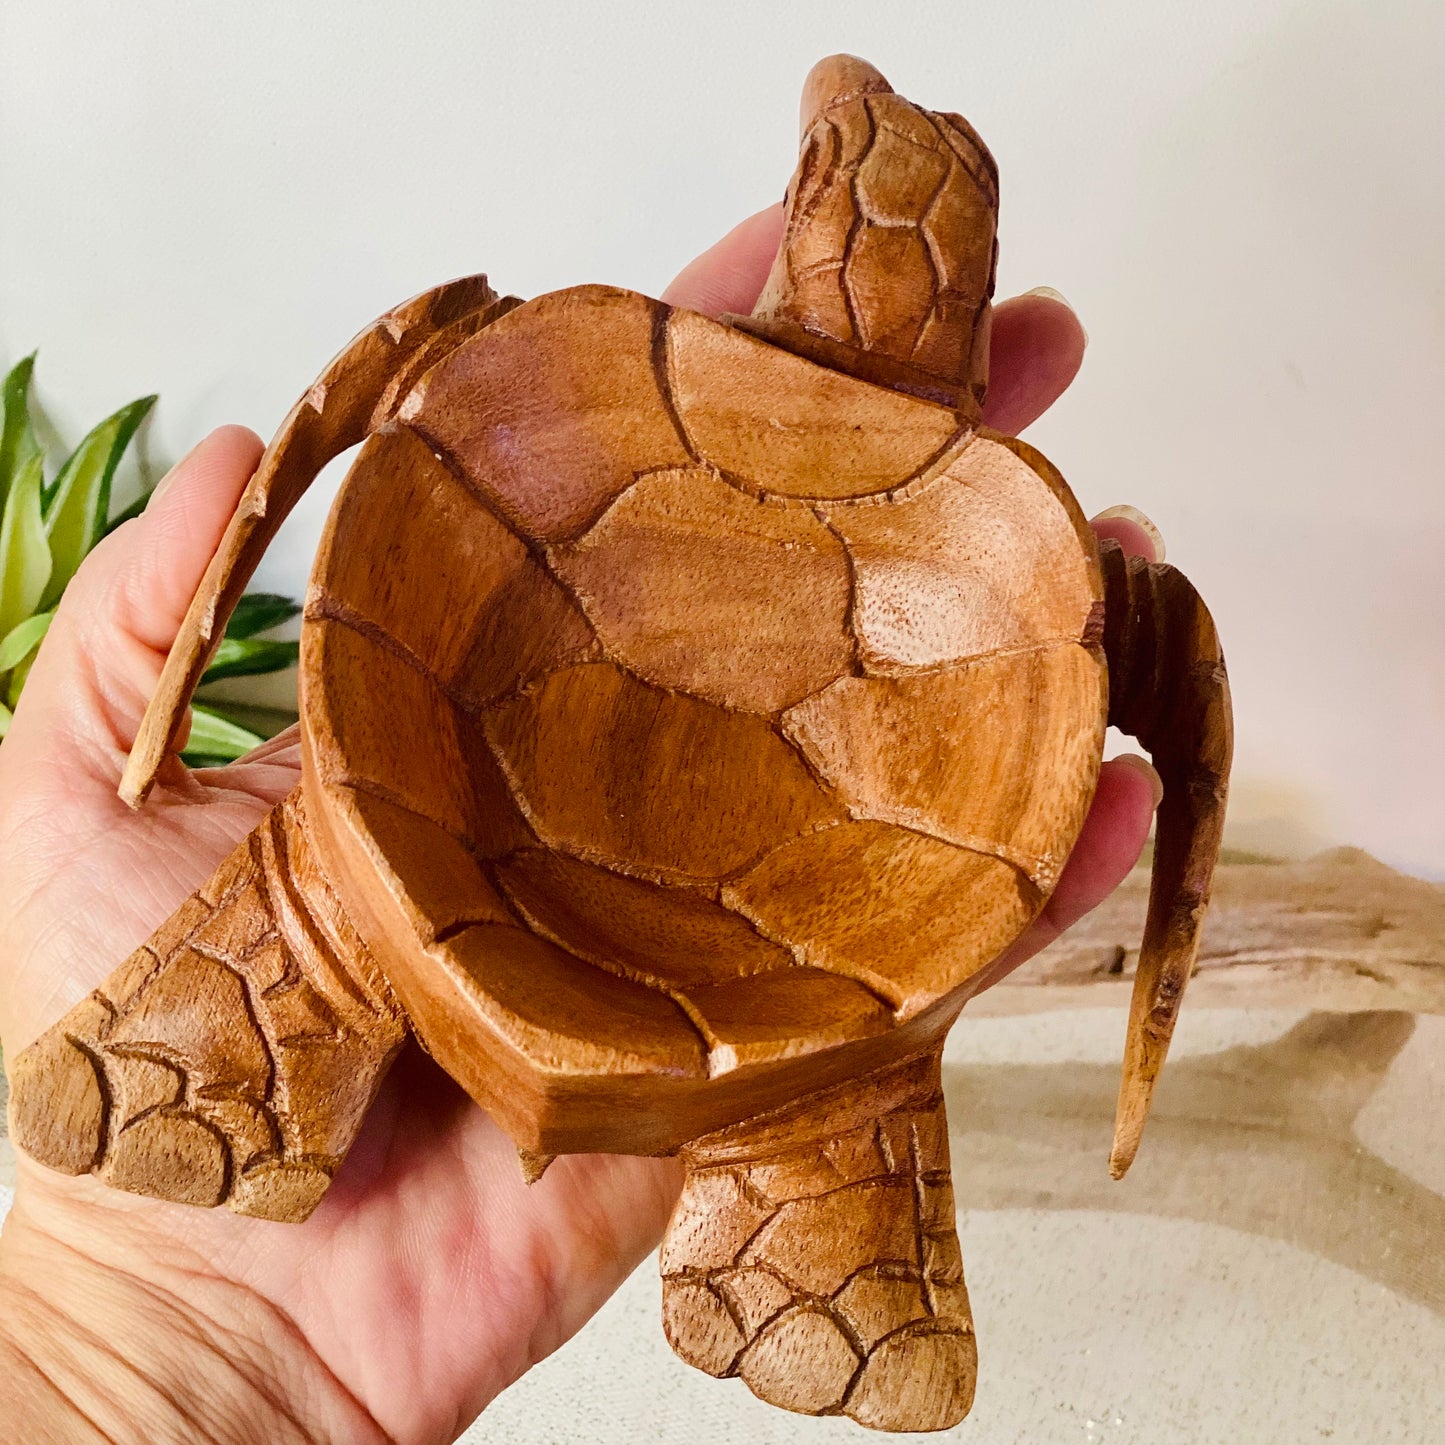 Exquisite Hand-Carved Turtle Bowls from Bali: Artistic Creations with Island Soul